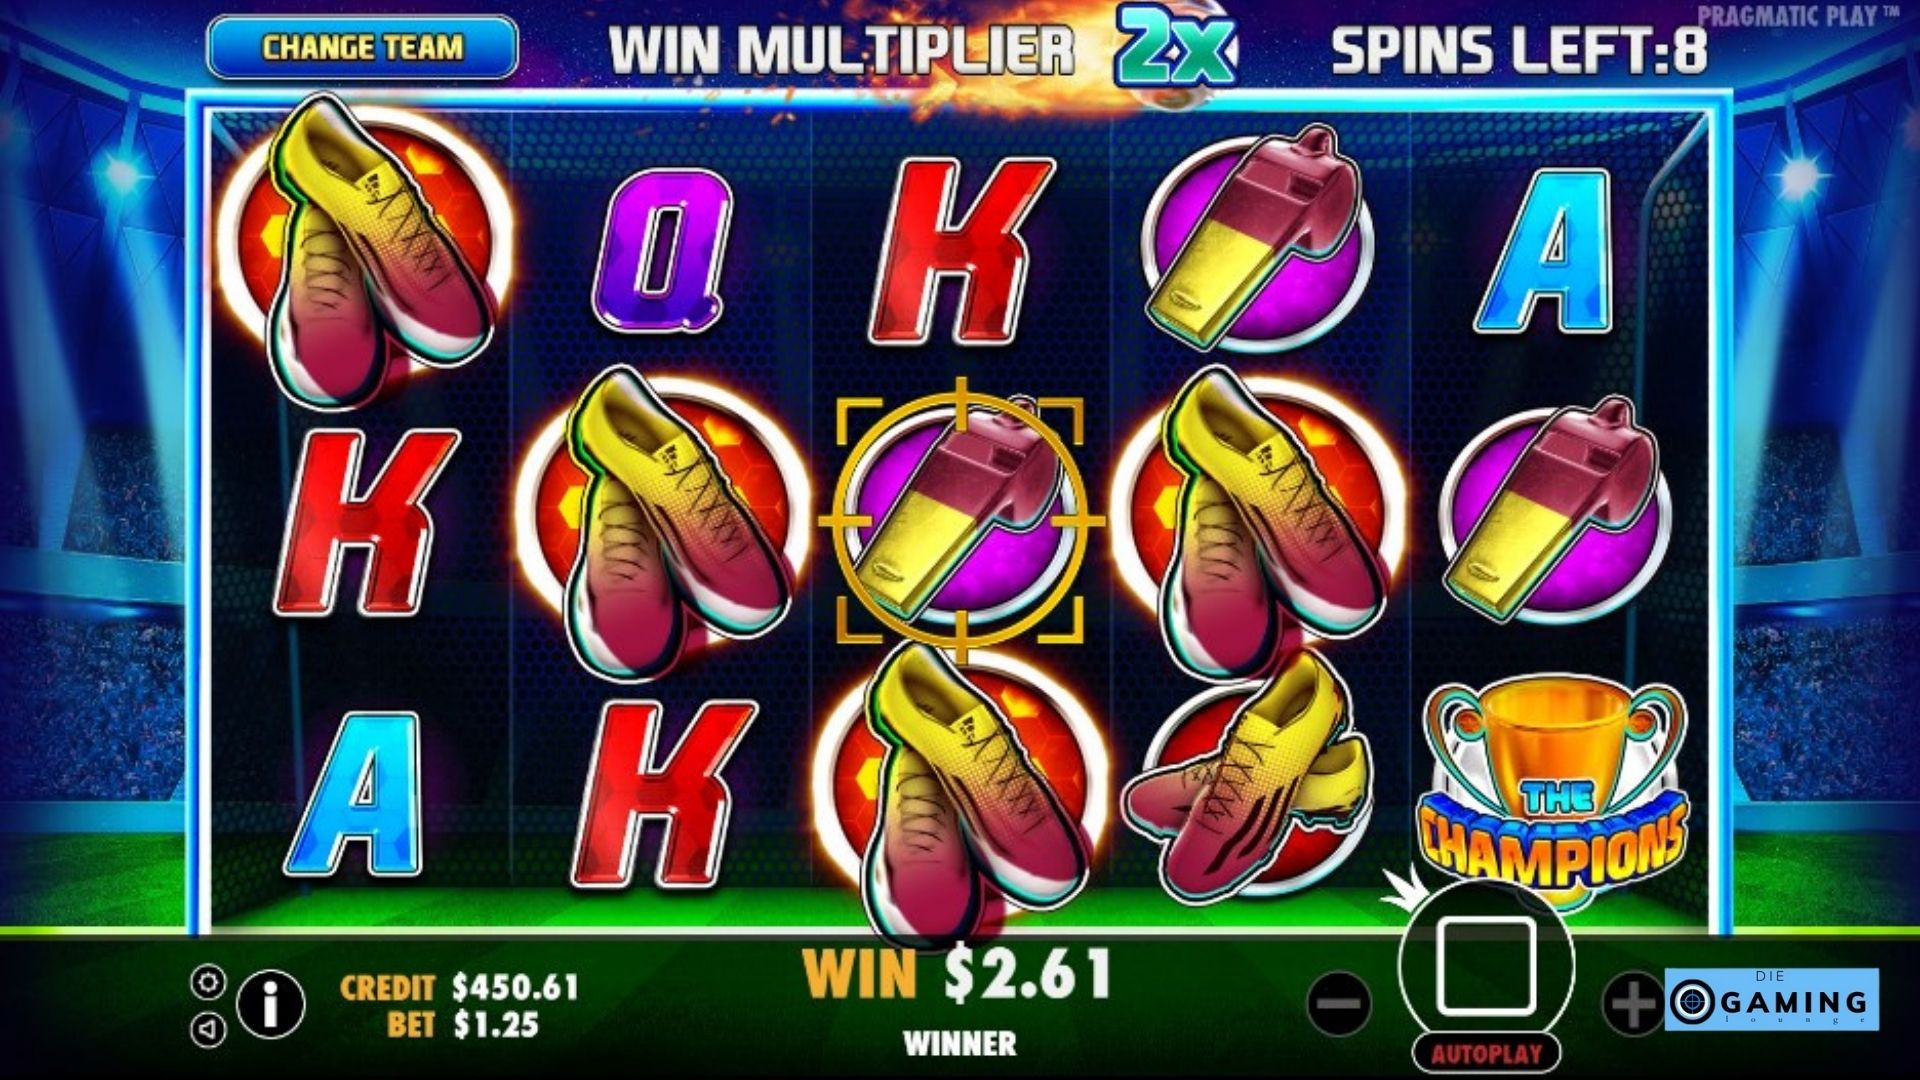 Spin left. Book of Champions Slot.